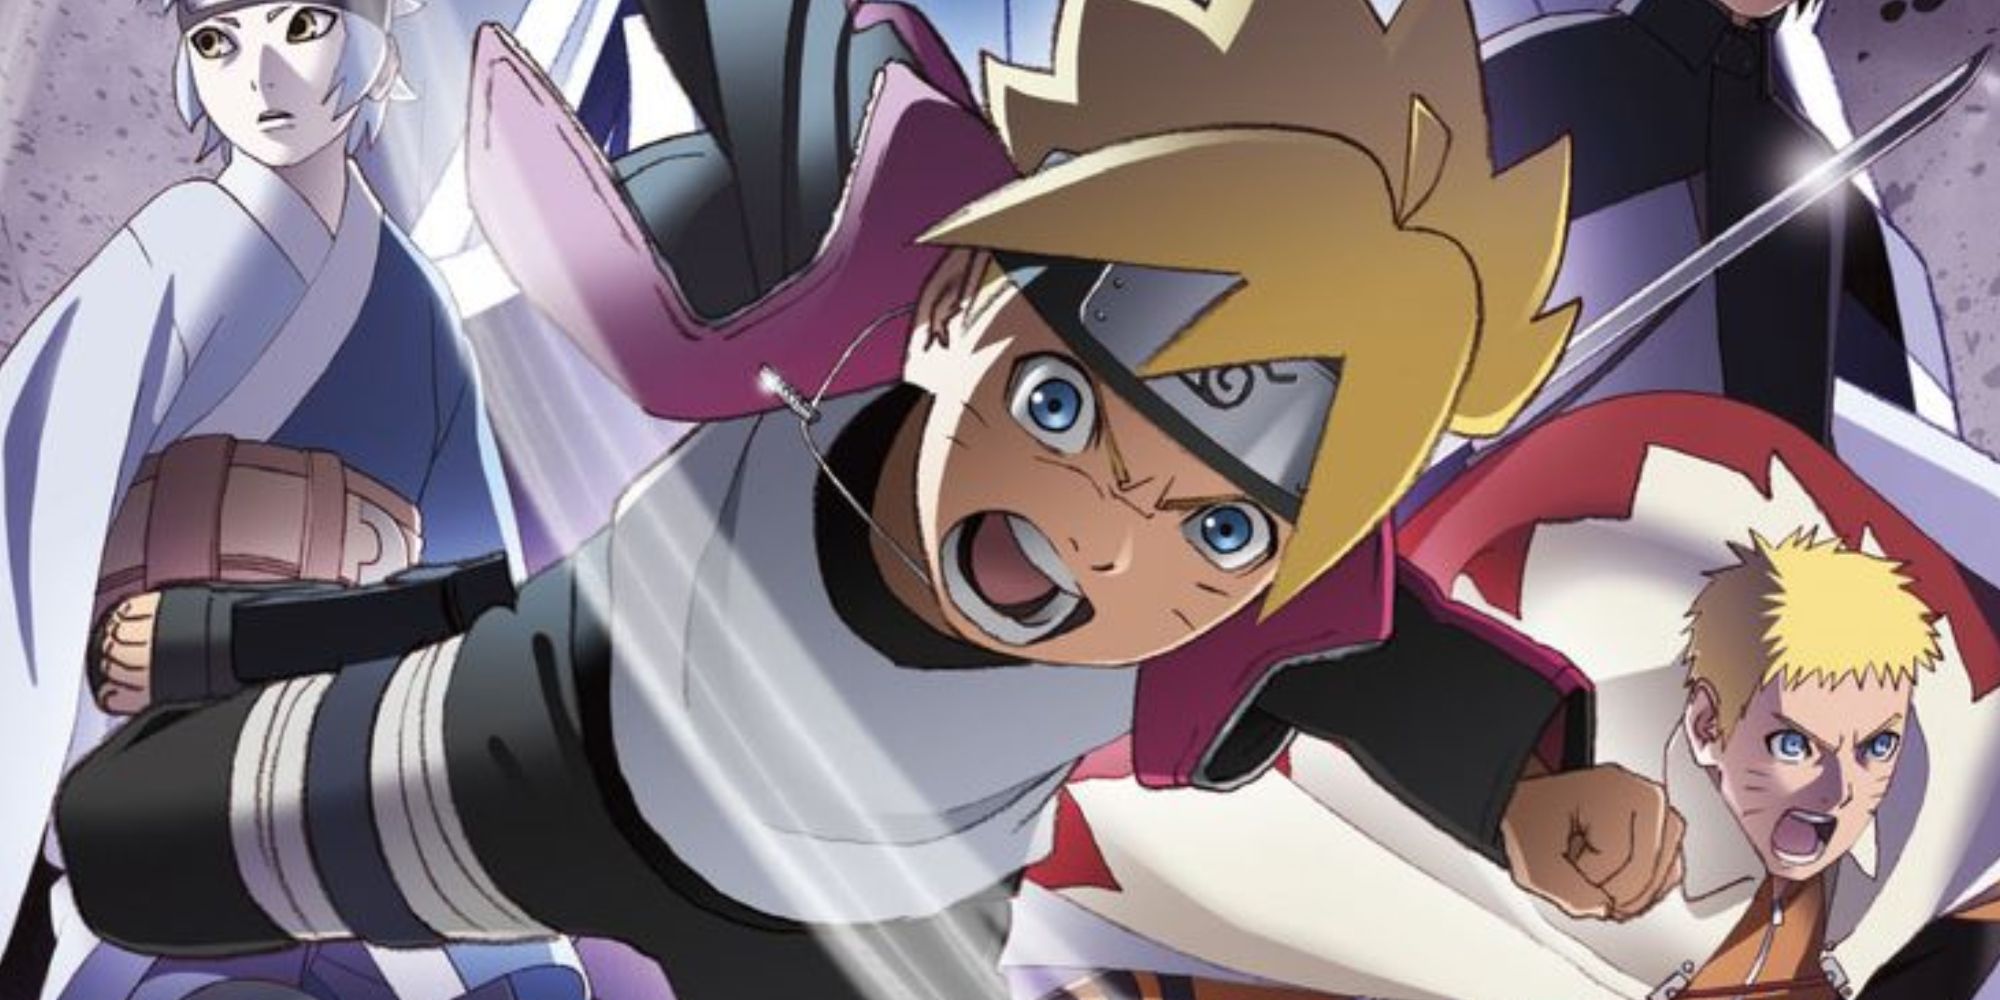 Characters from the Boruto anime, with the main character jumping towards the viewer.